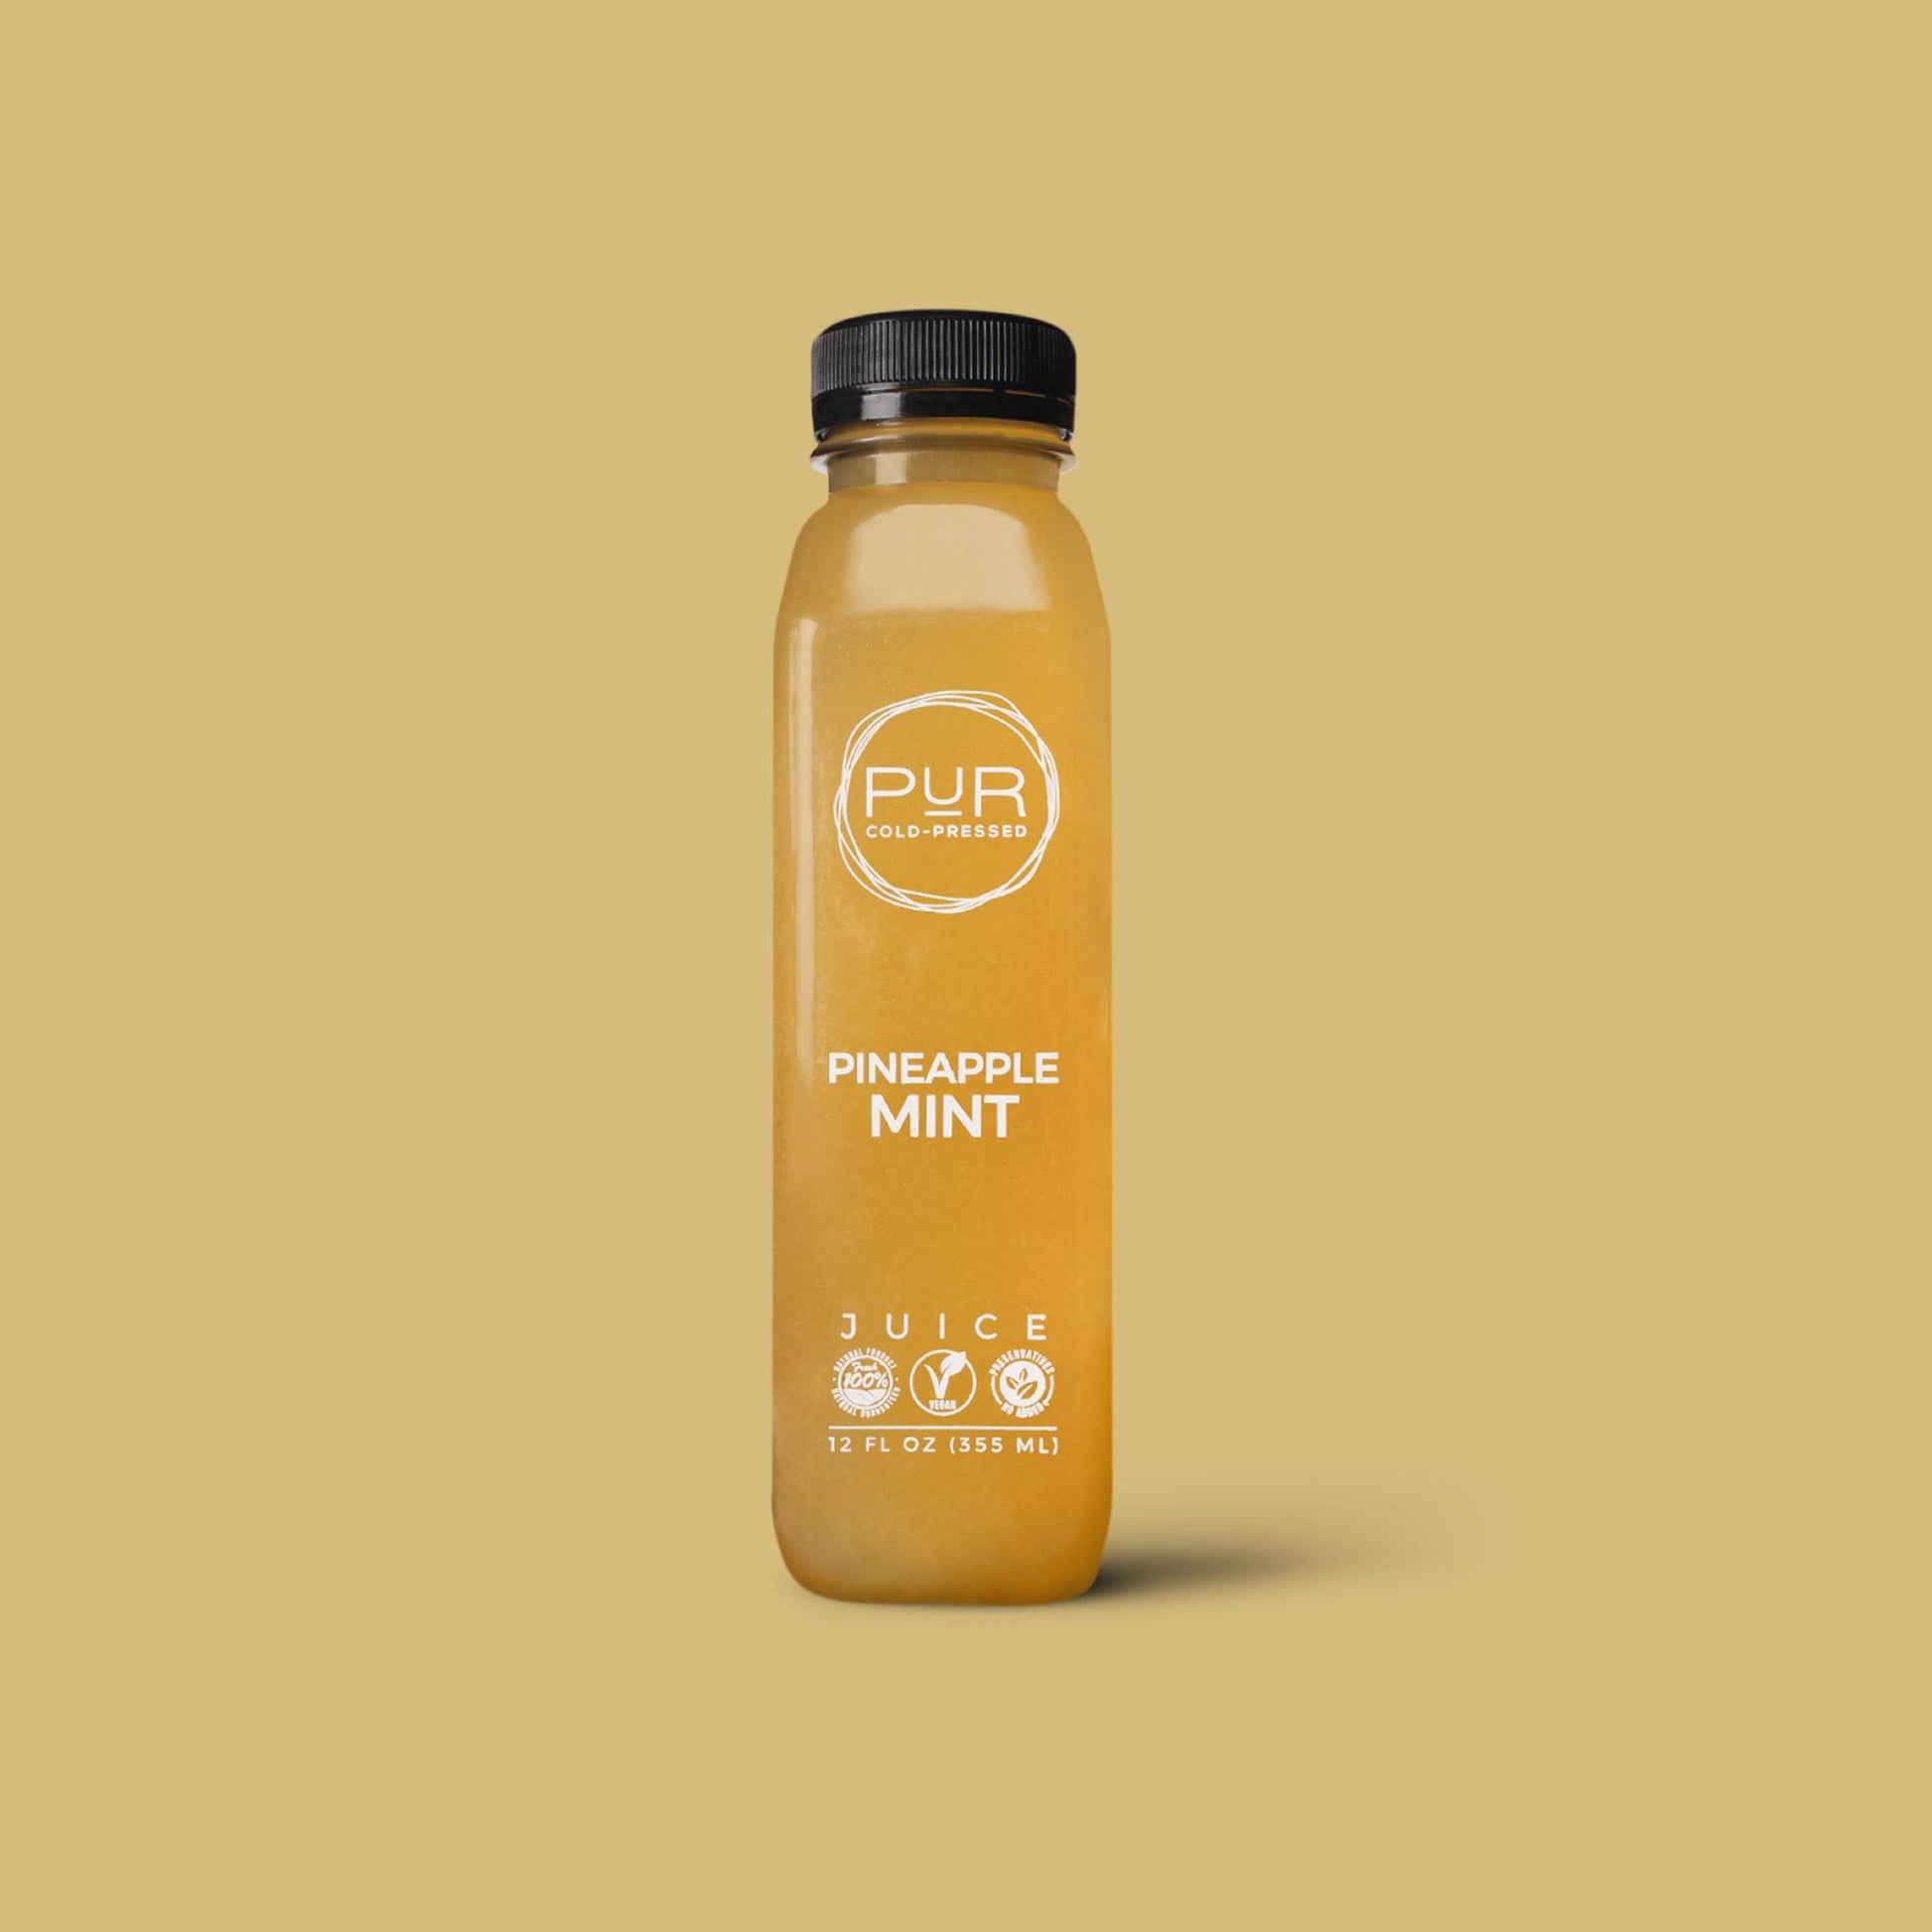 PUR juice cleanse cold pressed juice PINEAPPLE MINT COLD PRESSED JUICE Cold-Pressed Pineapple Juice With Mint | PUR Individual Juice